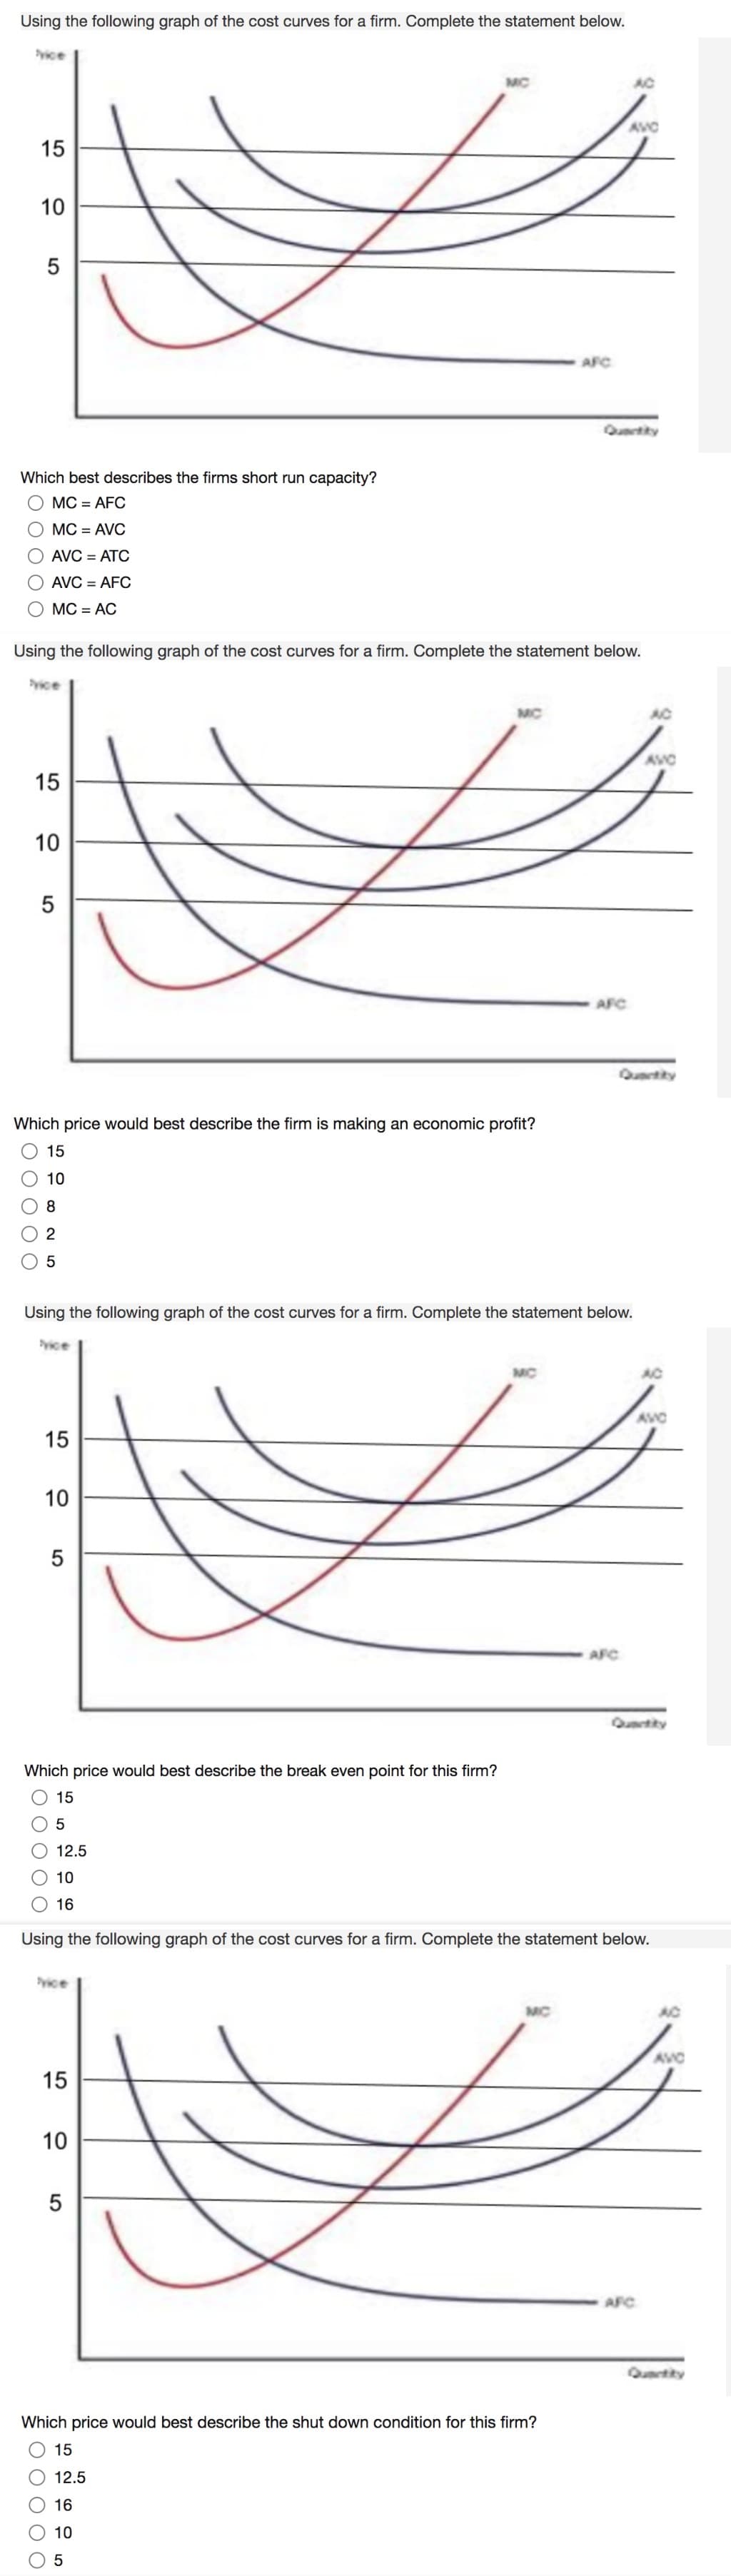 Using the following graph of the cost curves for a firm. Complete the statement below.
yice
MC
AC
AVC
15
AFC
Qutity
Which best describes the firms short run capacity?
MC = AFC
MC = AVC
AVC = ATC
AVC = AFC
MC = AC
Using the following graph of the cost curves for a firm. Complete the statement below.
yice
MC
AC
AVC
15
10
AFC
Qurtity
Which price would best describe the firm is making an economic profit?
15
10
8
5
Using the following graph of the cost curves for a firm. Complete the statement below.
yice
AC
AVC
15
10
5
AFC
Qurtity
Which price would best describe the break even point for this firm?
O 15
12.5
10
16
Using the following graph of the cost curves for a firm. Complete the statement below.
yice
MC
AC
AVC
15
10
AFC
Quantity
Which price would best describe the shut down condition for this firm?
15
12.5
16
10
10
5
5
